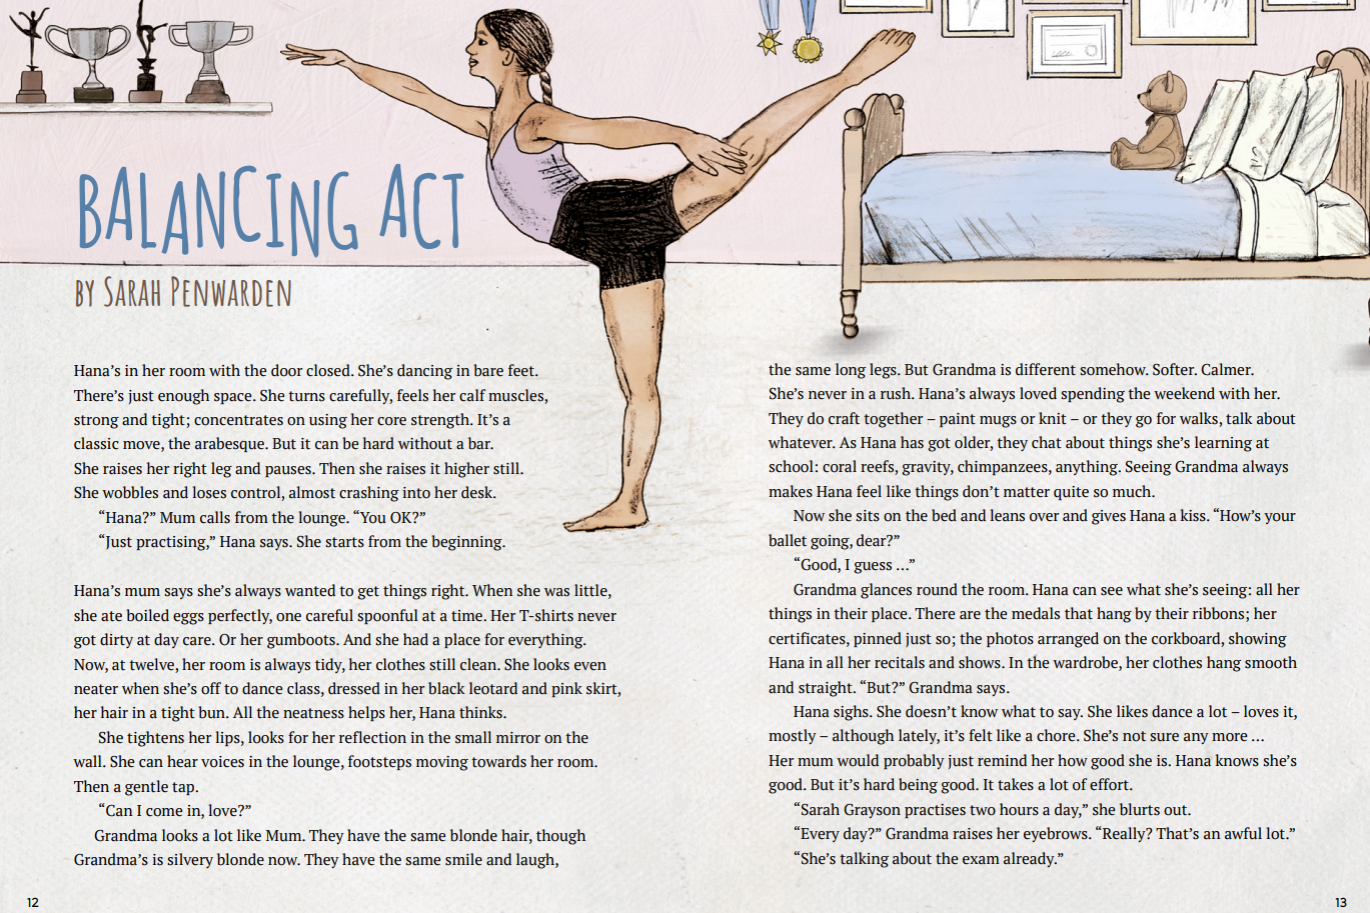 'Balancing act by Sarah Penwarden' illustration shows a young girl doing an arabesque in her room.